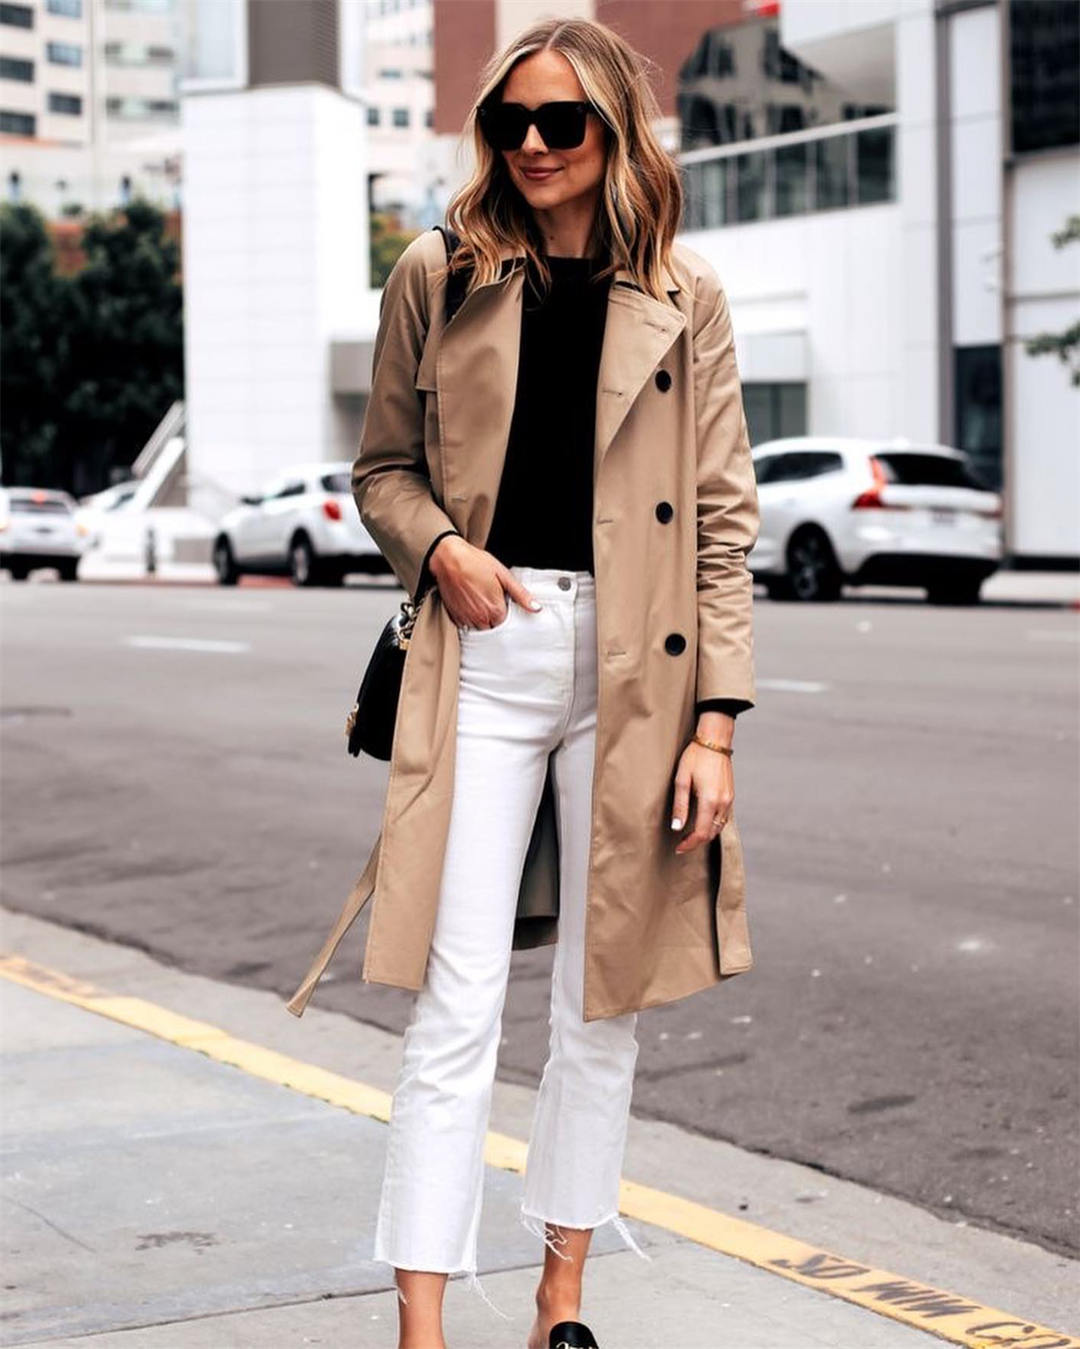 Trench Coat outfit ideas for women 12